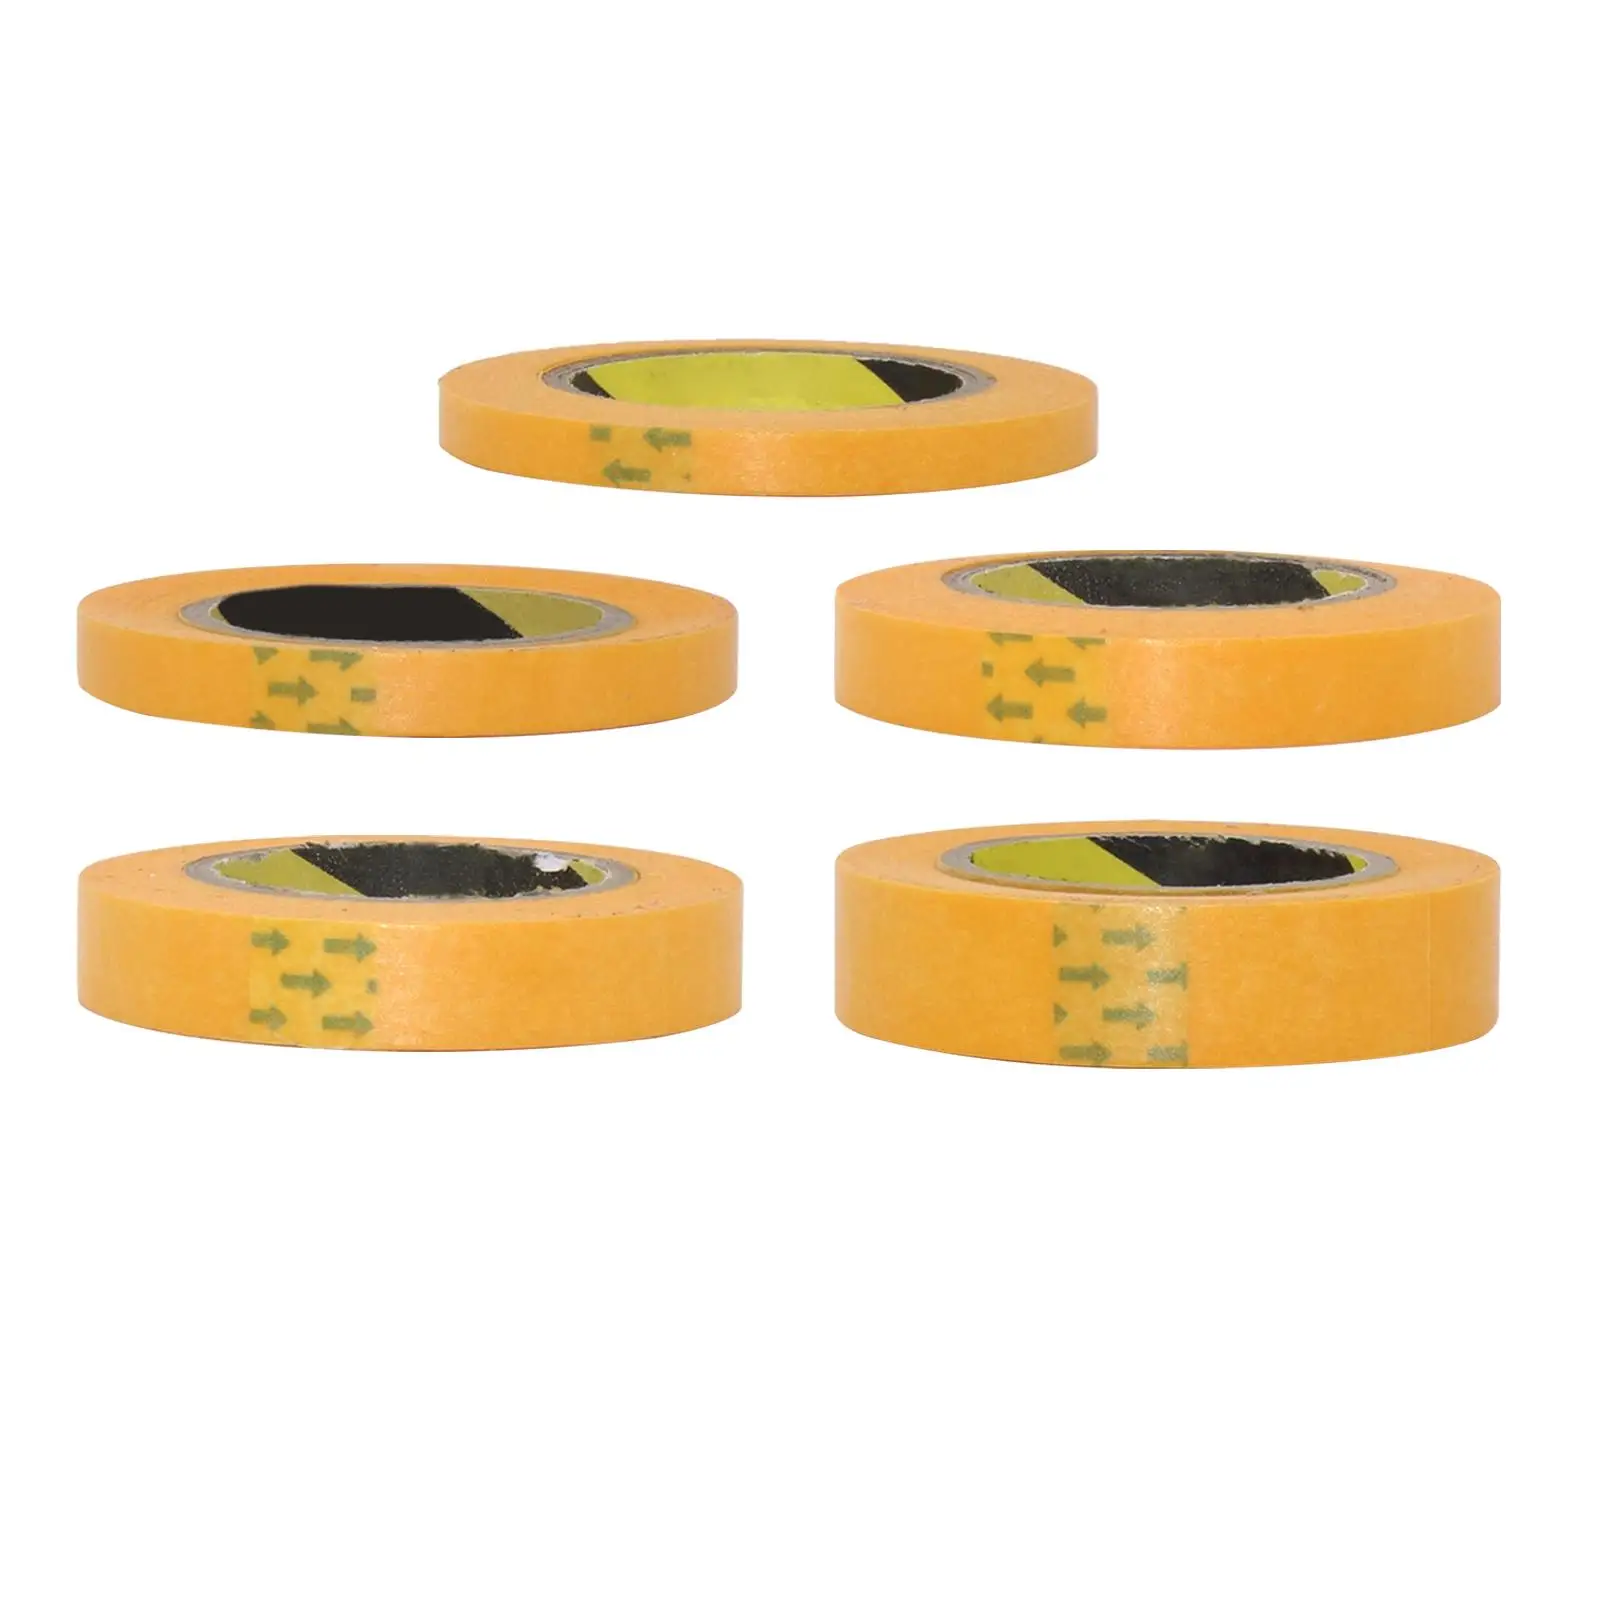 

Painting Model Masking Tape 67 inch Masking Tape for Model Painting for Hobby Model Windows, Doors Walls Stationery DIY Projects